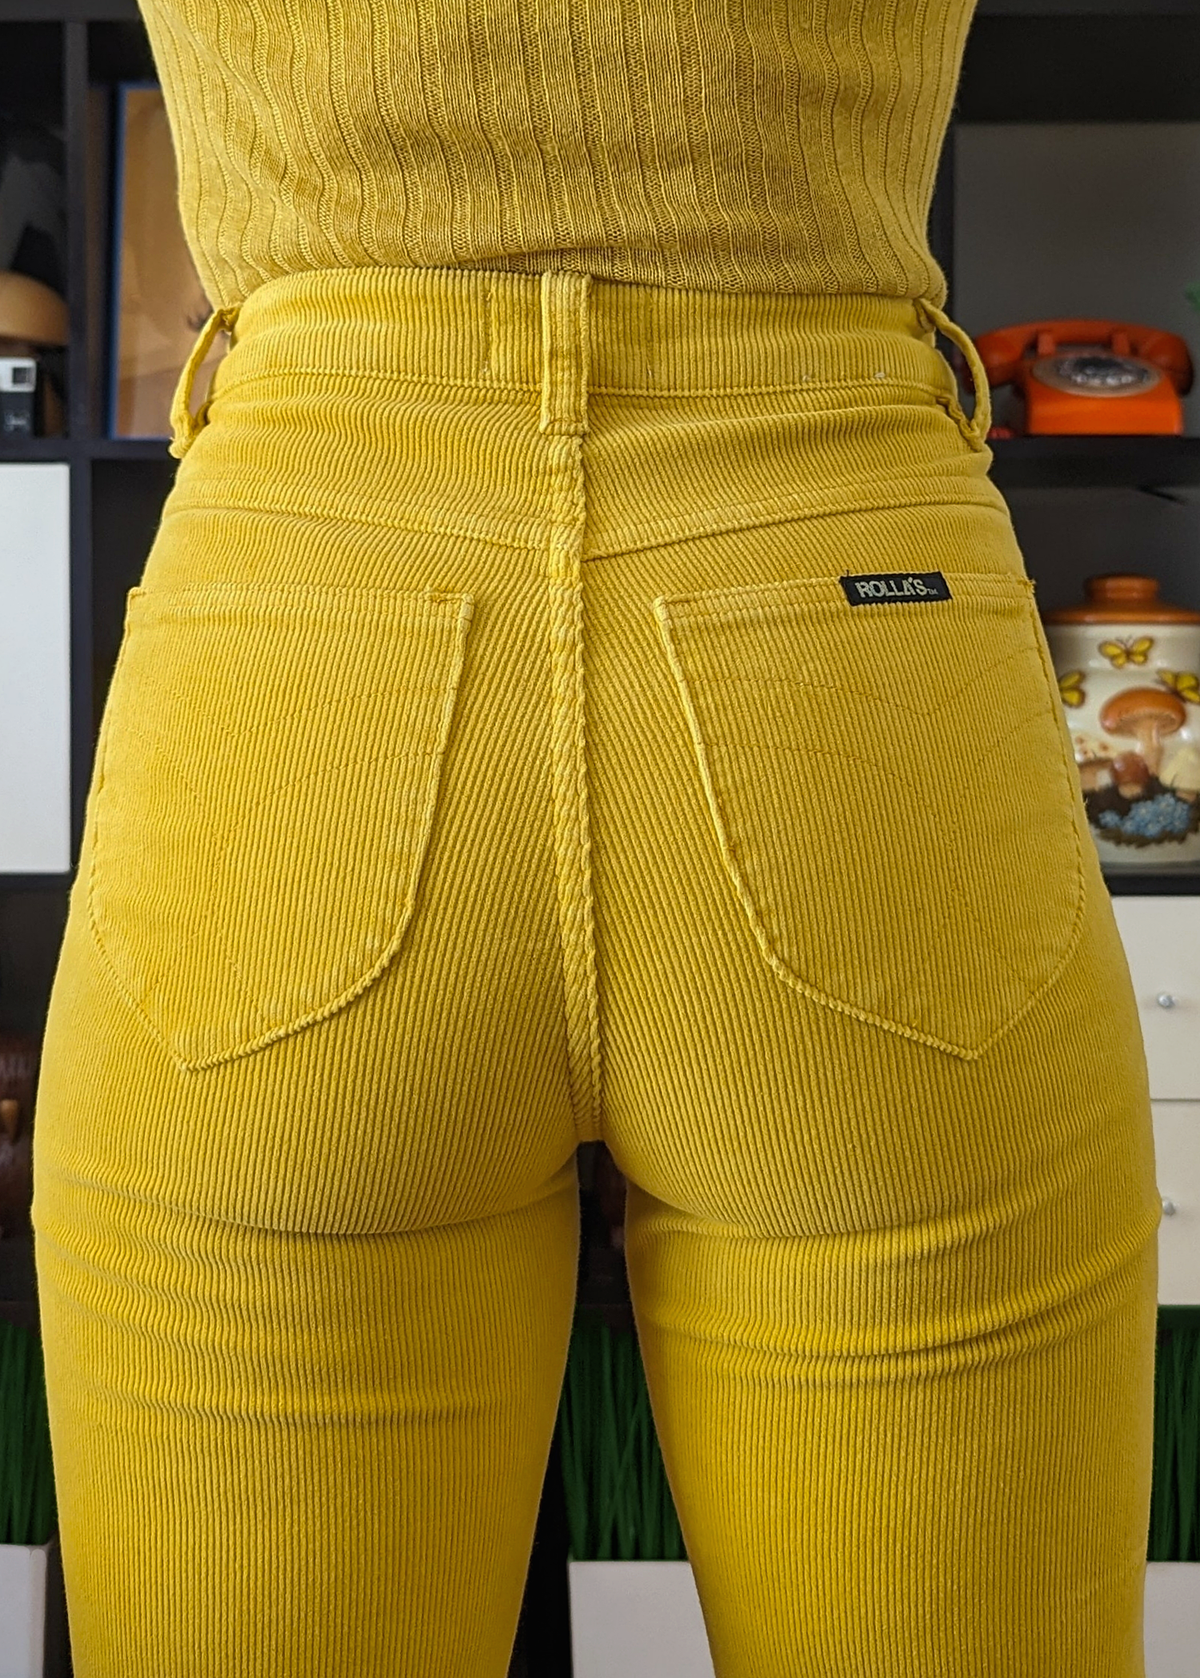 Gold Yellow Stretch Corduroy Ankle Crop Length Eastcoast Flares with high rise waist by Rolla's Jeans